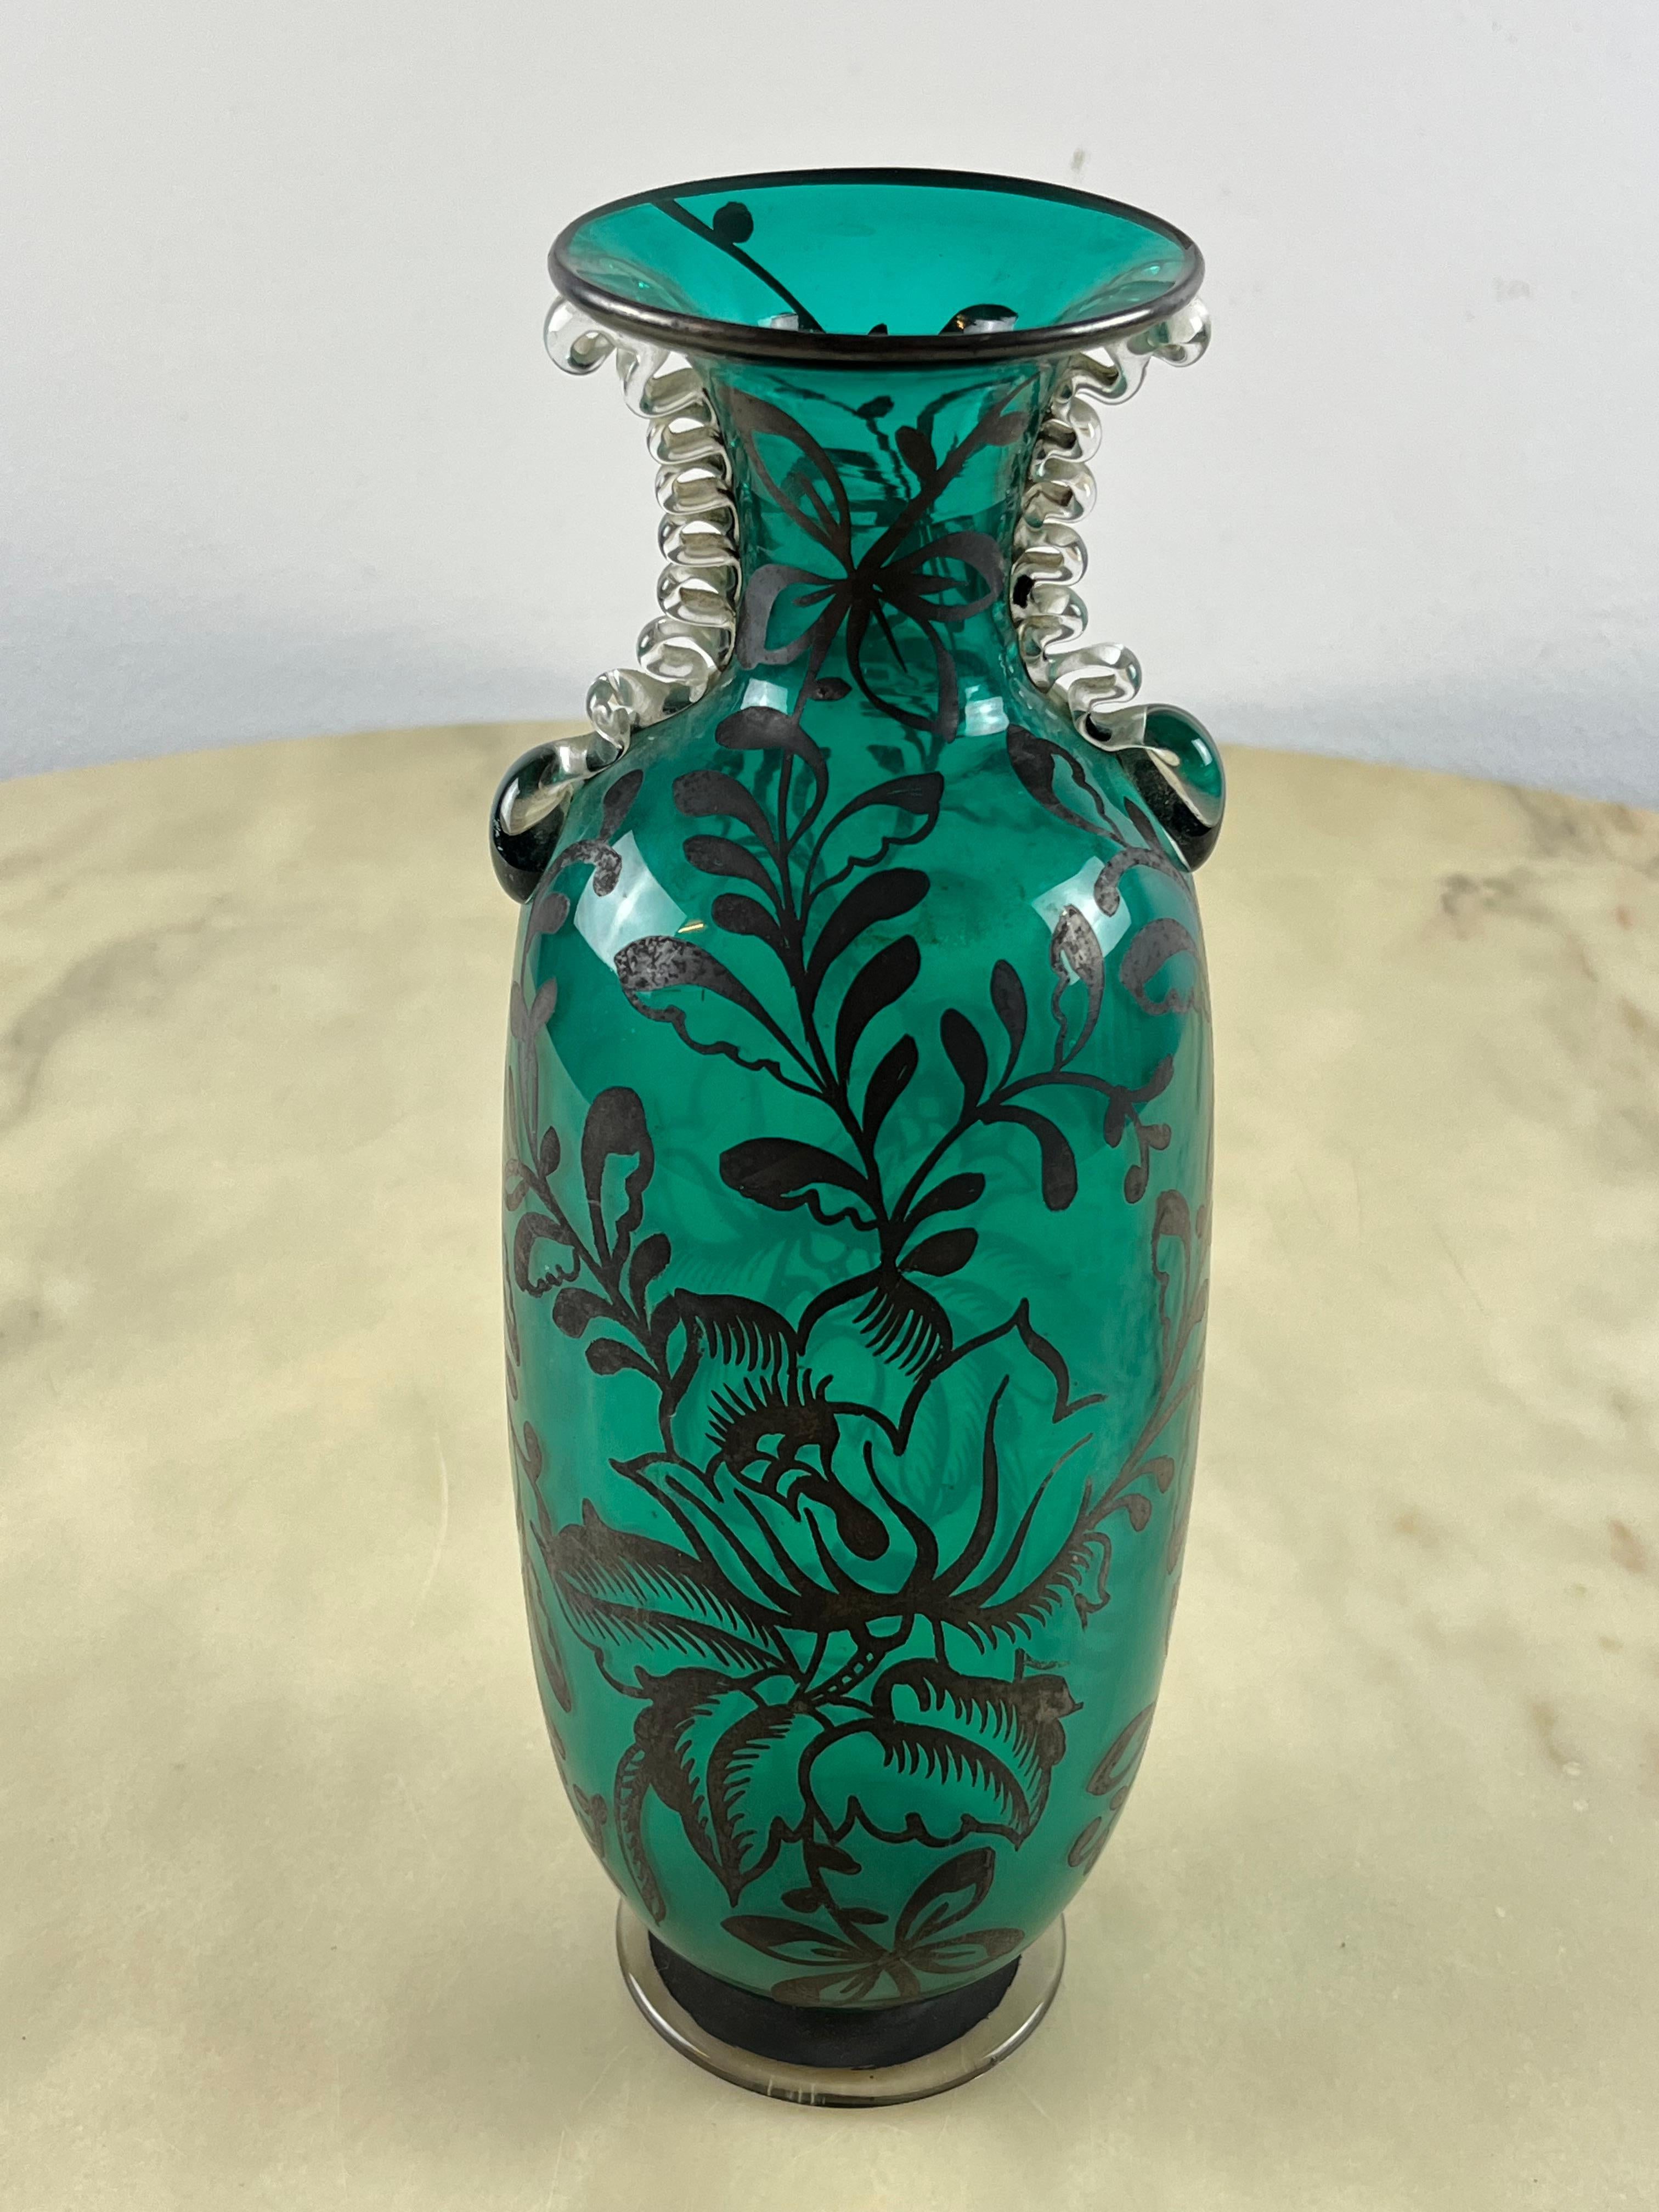 Decorated Murano glass vase, Italy, 1945
Purchased by my great-great-grandfather during a business trip to Venice. Intact, small signs of aging, good condition.